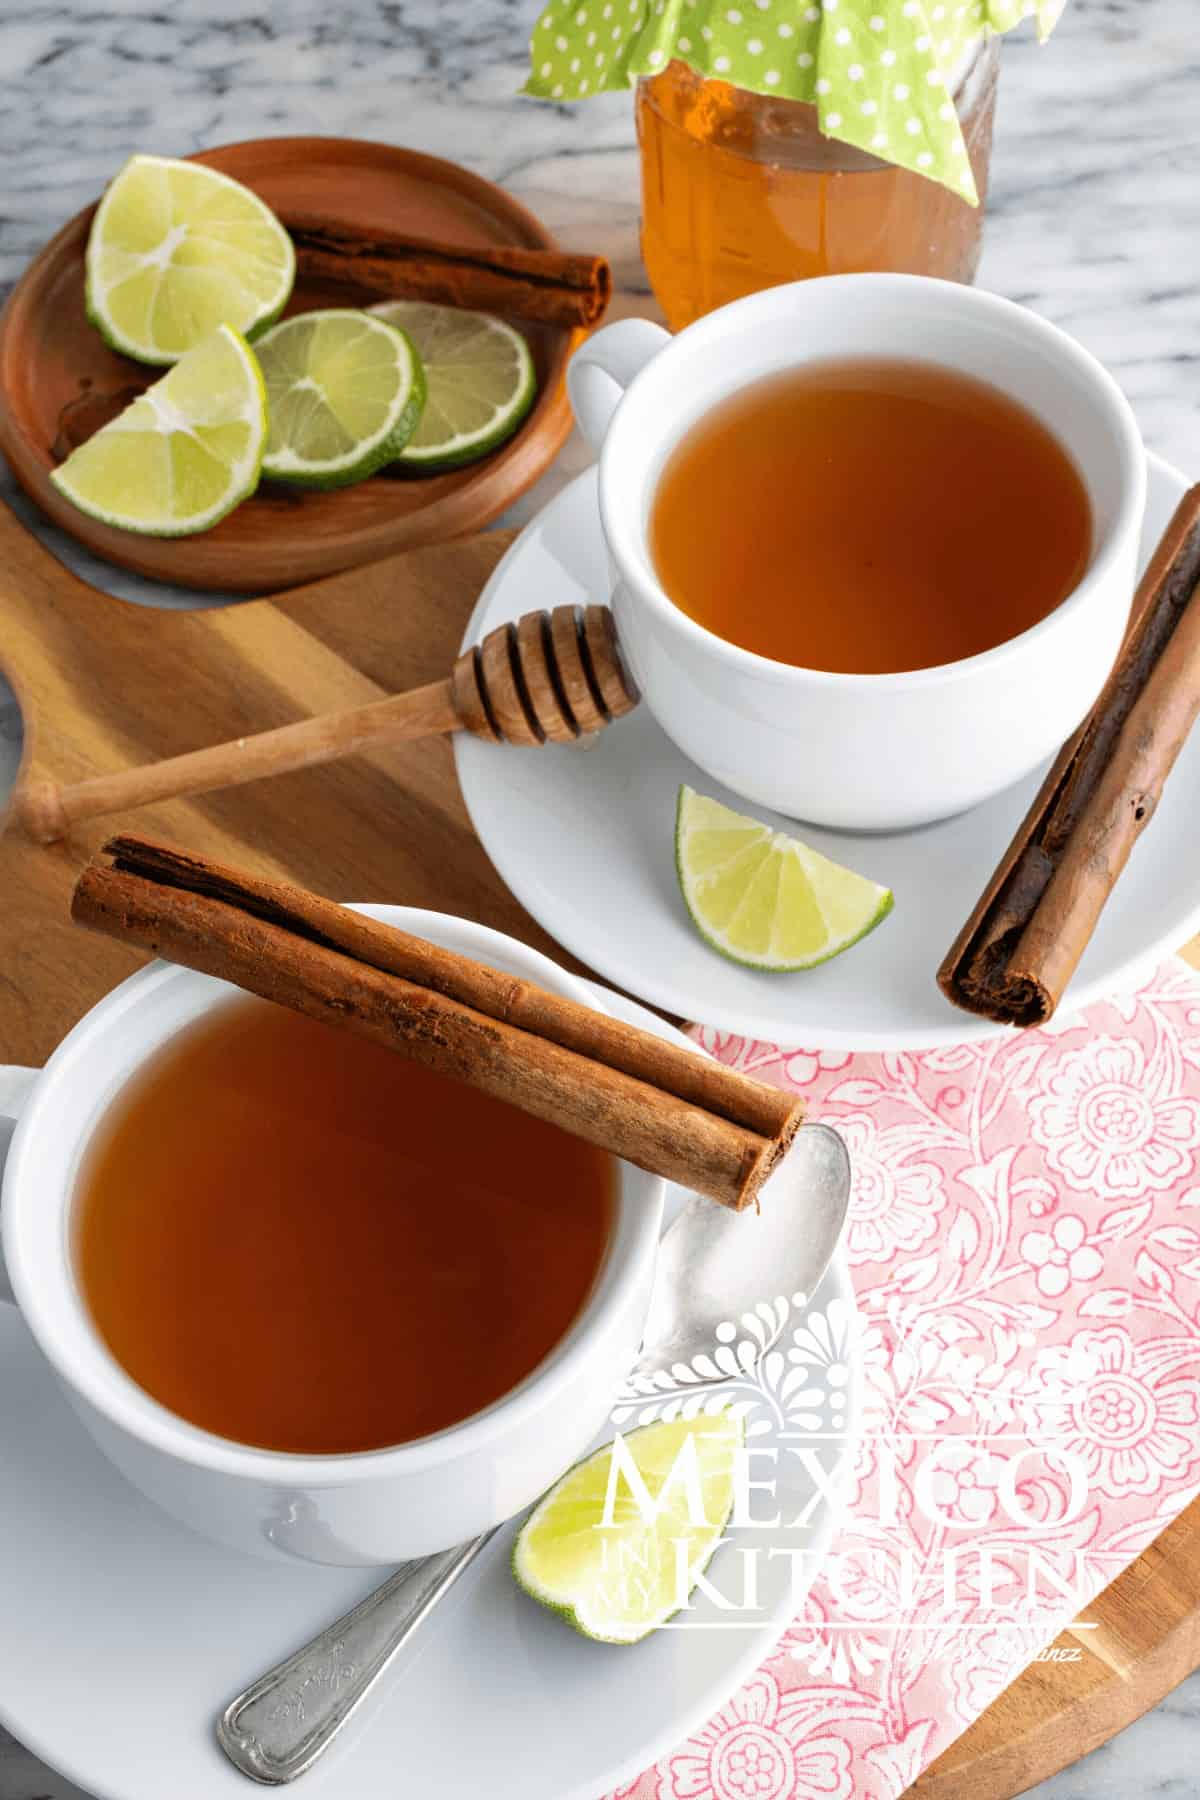 Cinnamon honey tea served in white cups, next to lime wedges and cinnamon sticks.